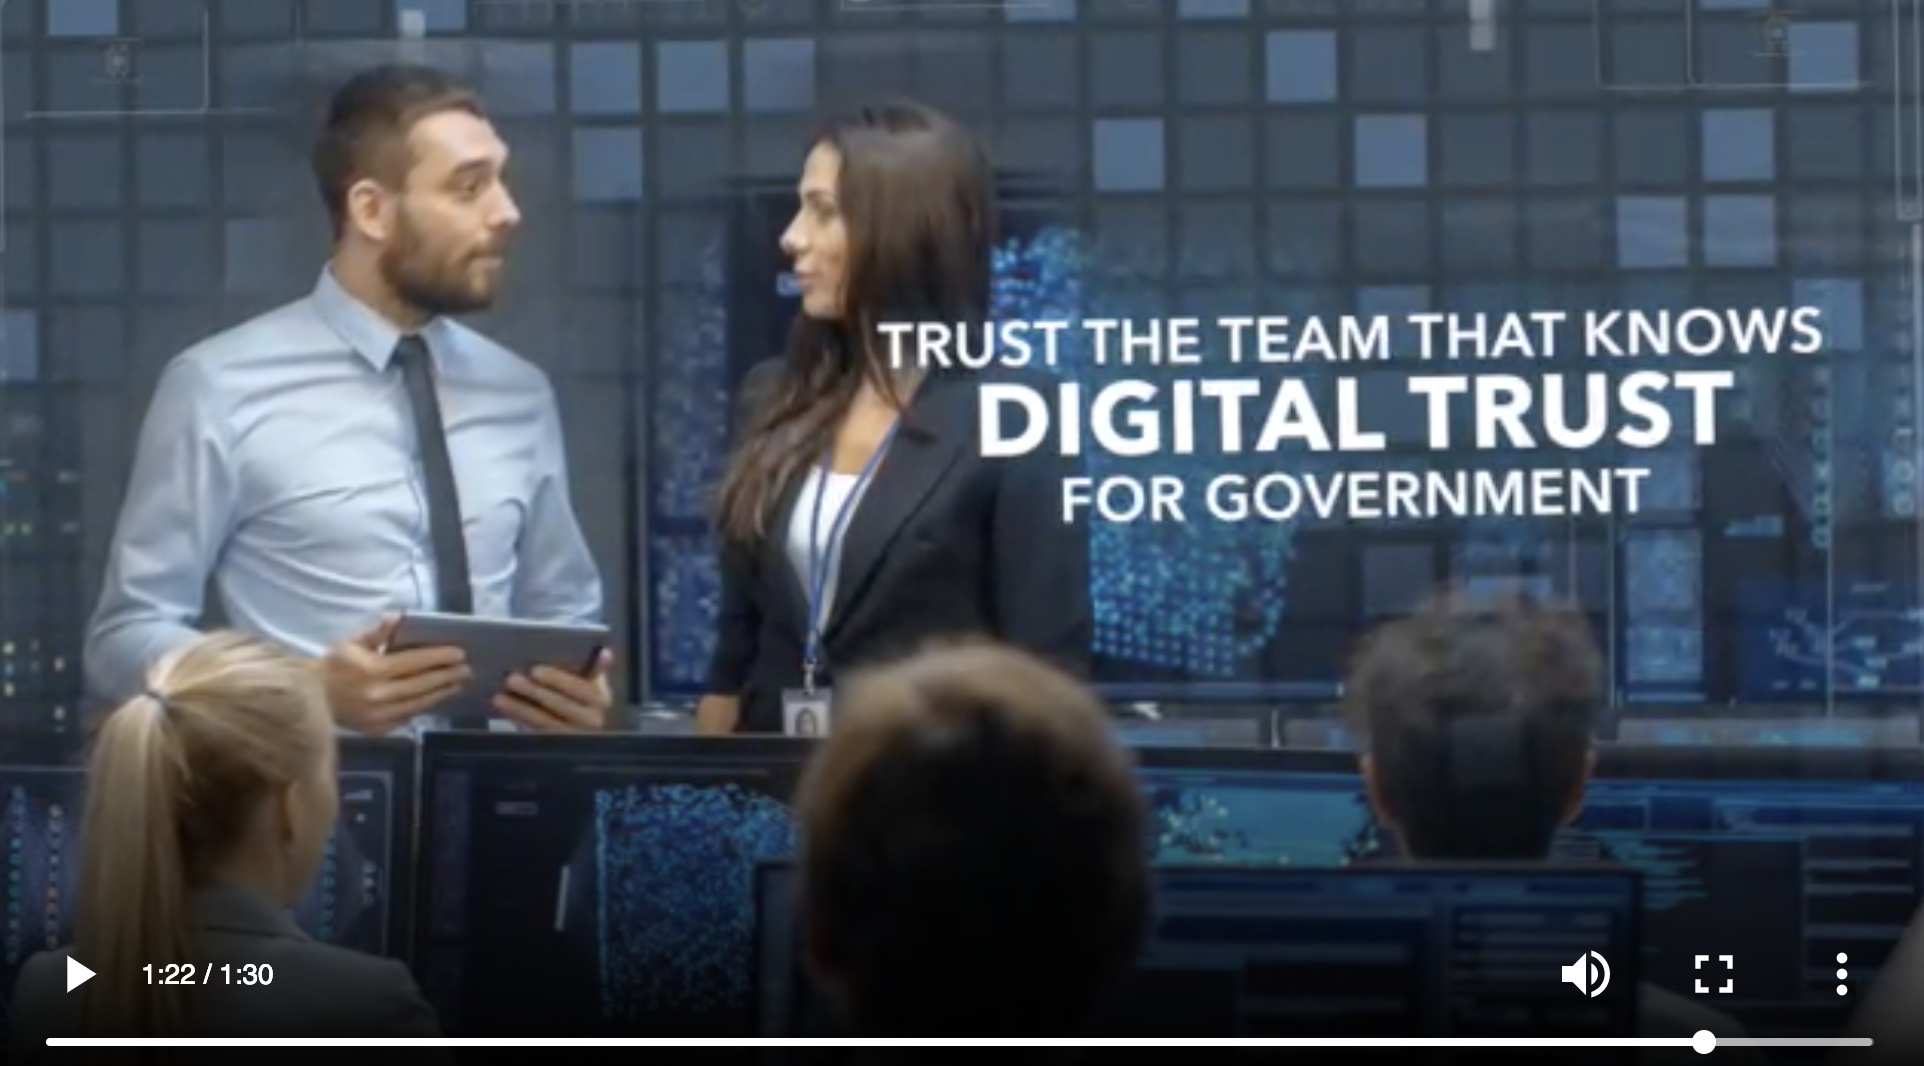 Watch the Cygnacom video to learn why government and businesses trust our cybersecurity expertise. https://www.cygnacom.com